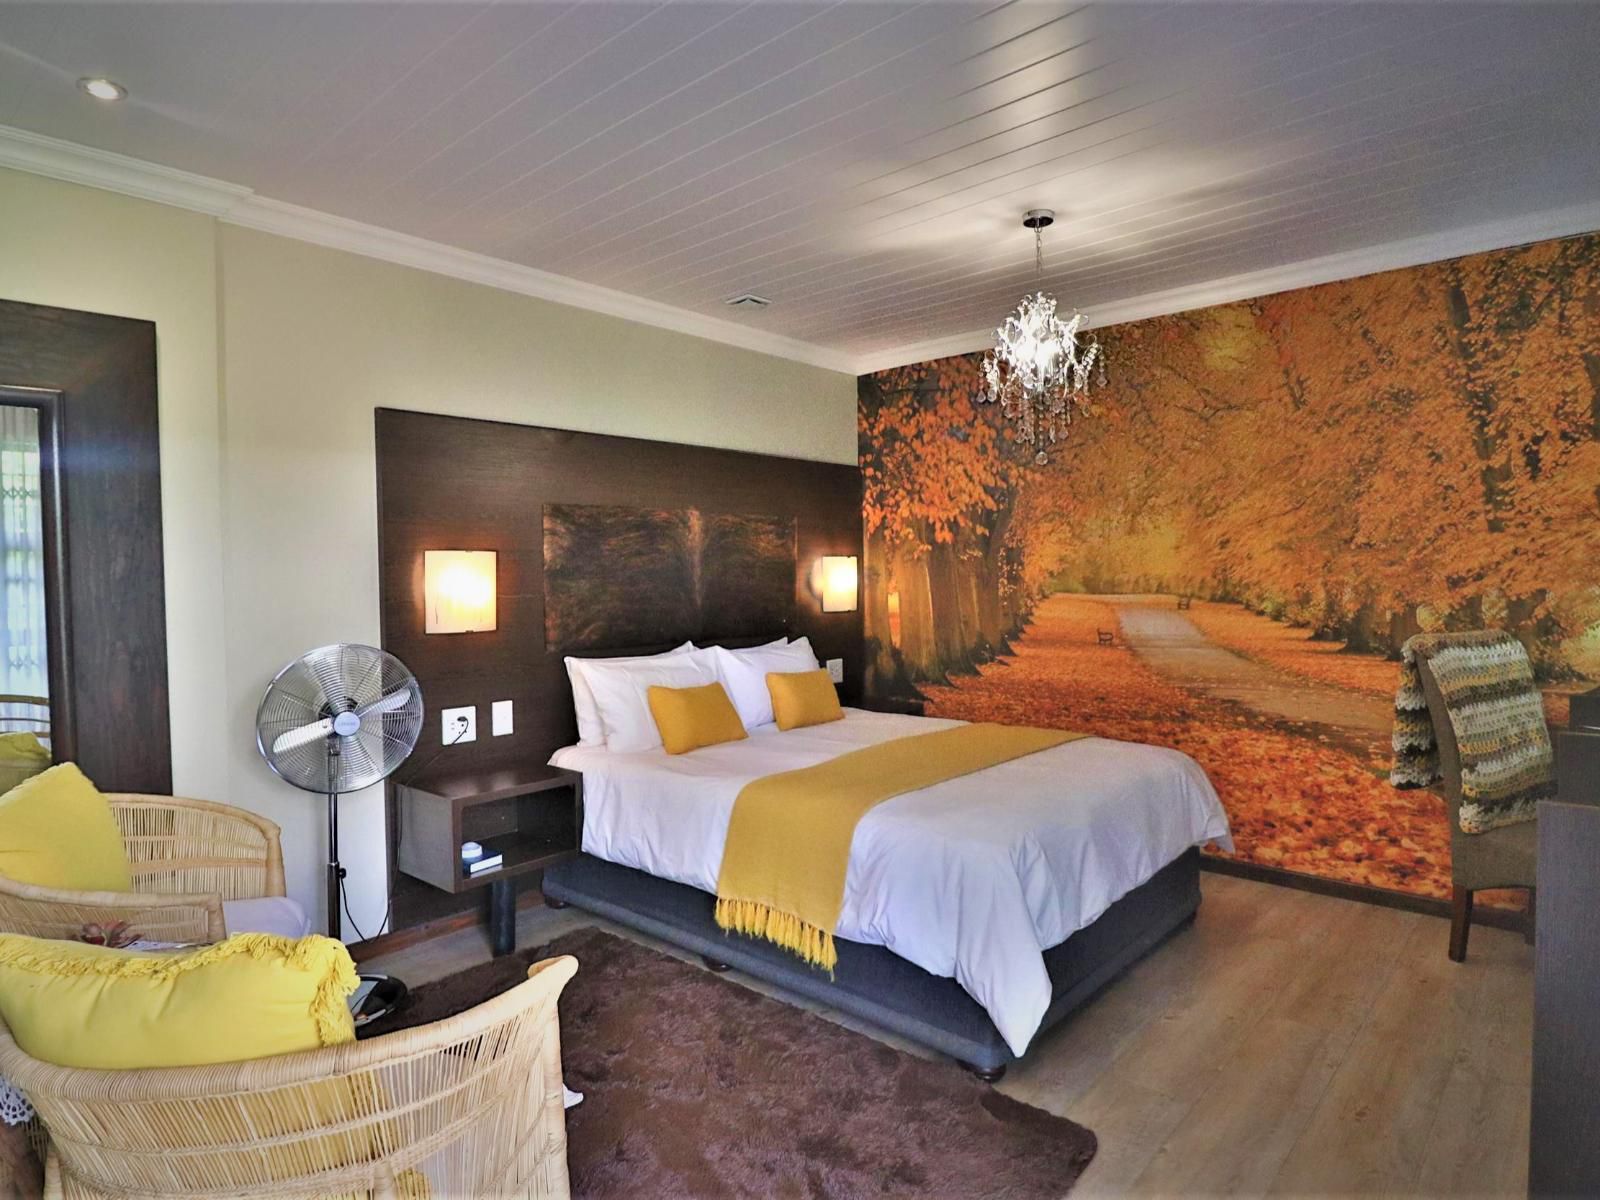 The Ranch Guesthouse Potchefstroom North West Province South Africa Autumn, Nature, Bedroom